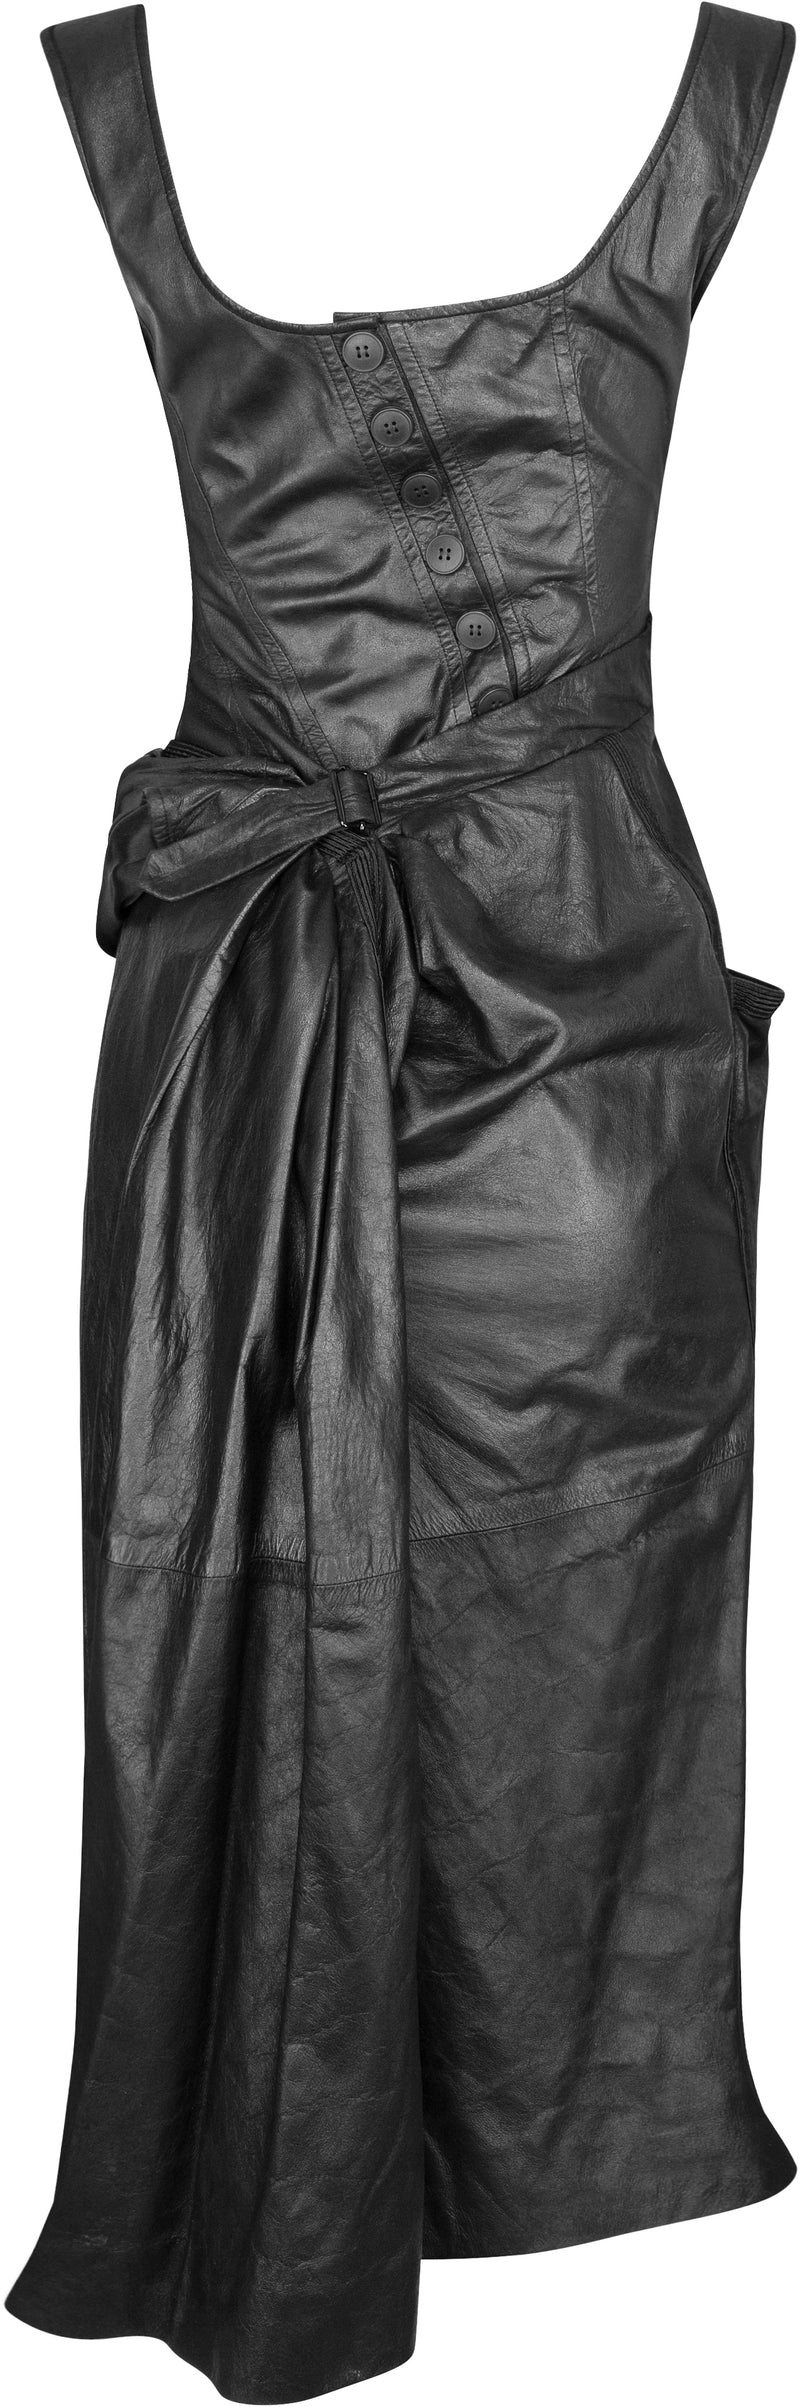 Christian Dior Spring 2000 Runway Leather Corset Dress